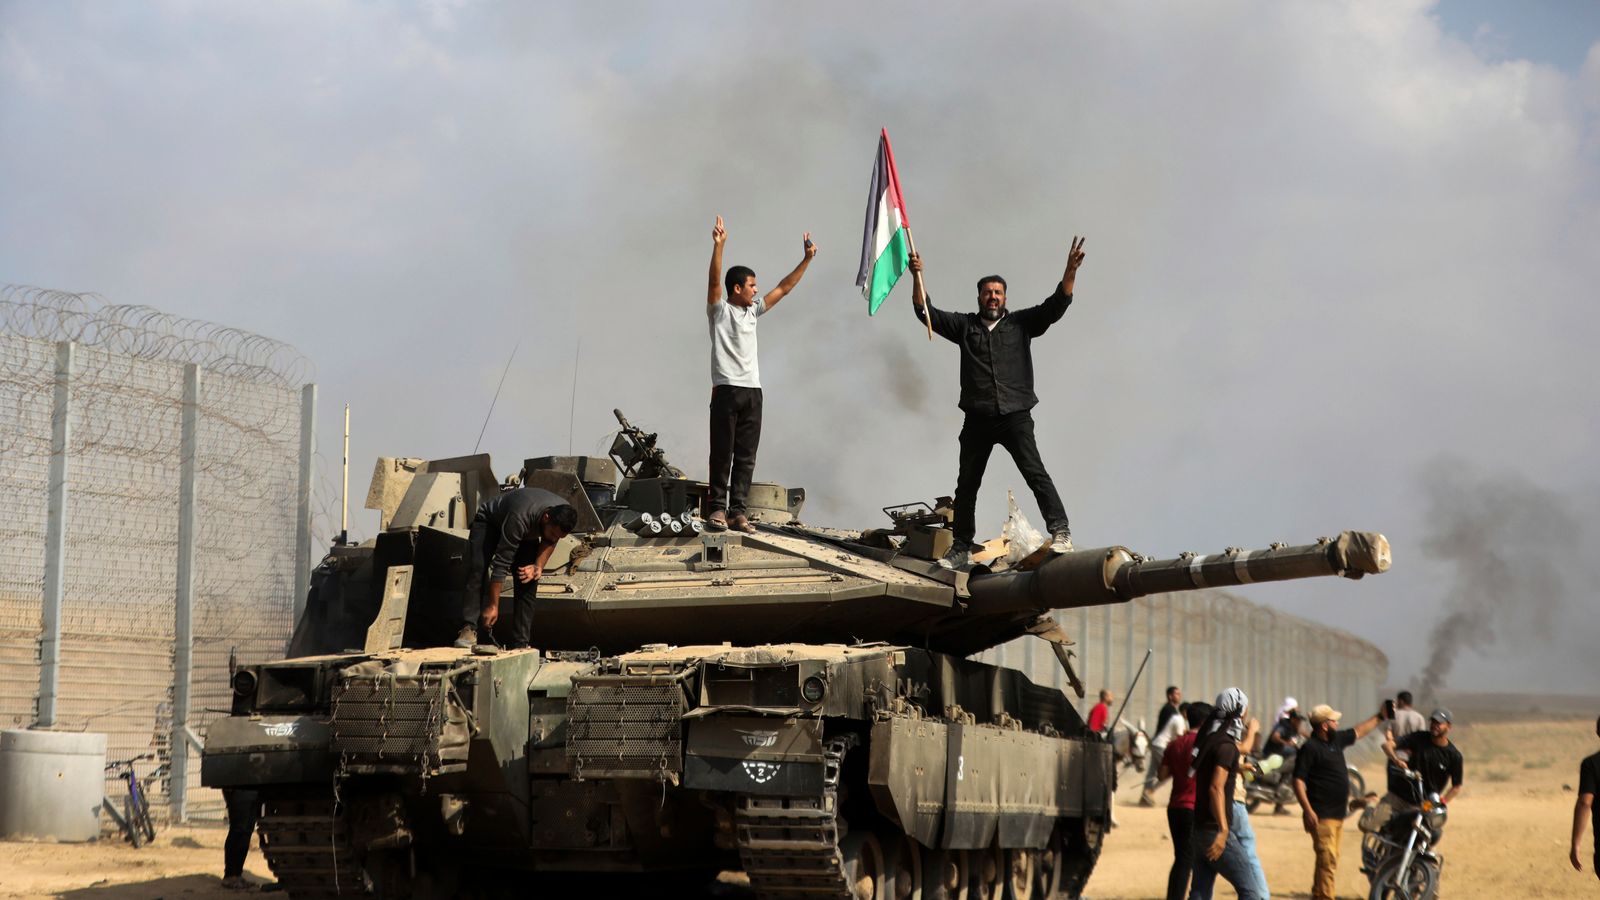 Unprecedented Hamas attack on Israel has caused crisis - and there are ...